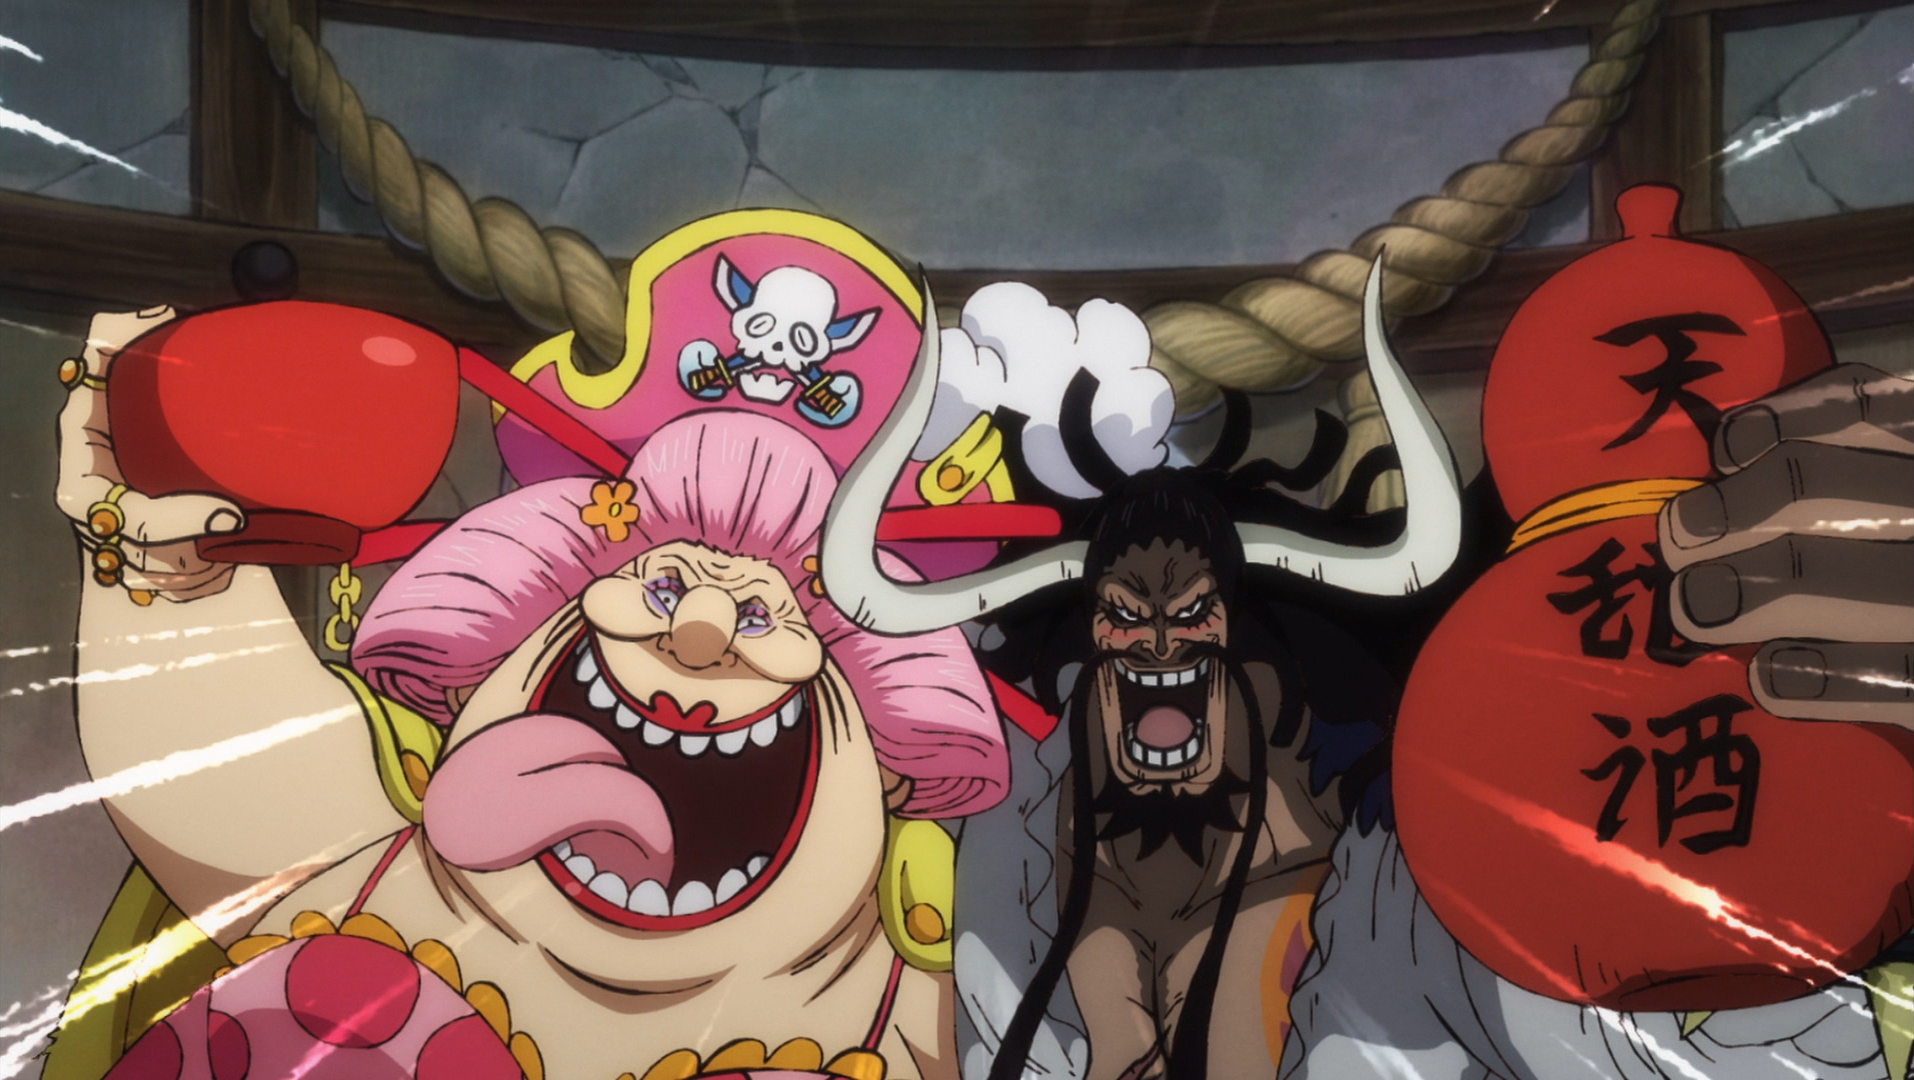 One Piece Episode 1017: Killer Almost Killed Kaido with His Technique!